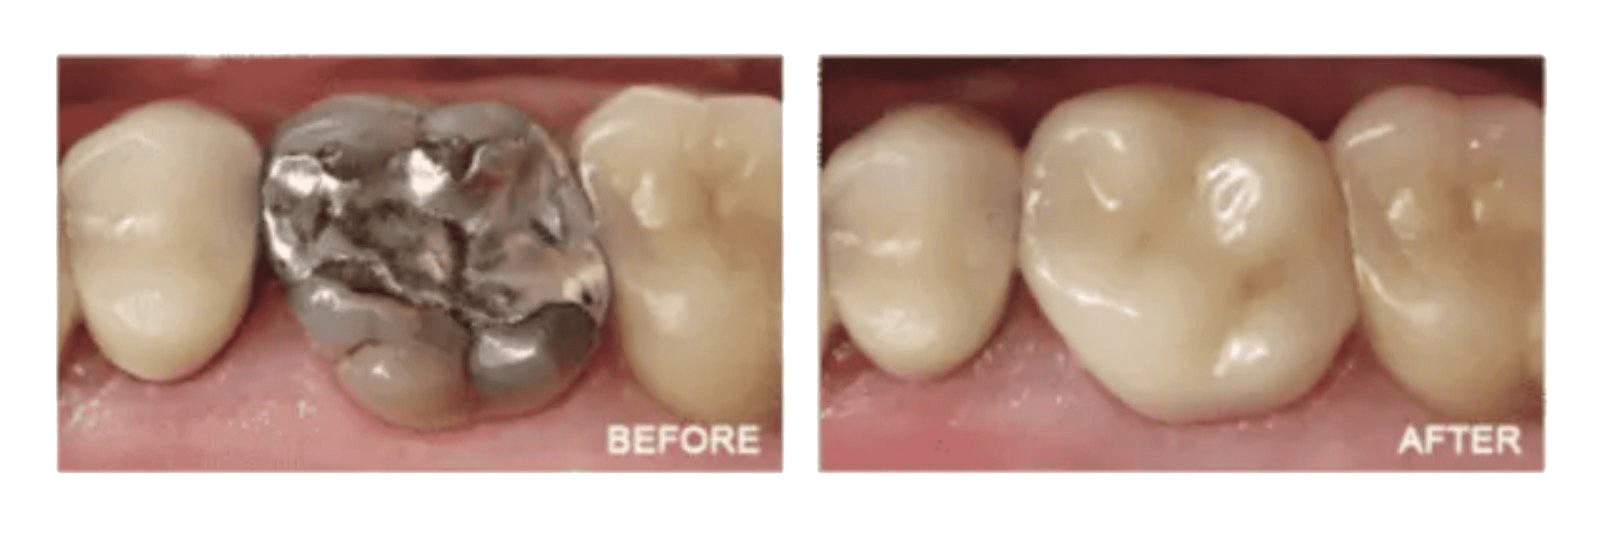 Before and after images of a tooth rebuilt using CEREC crowns.